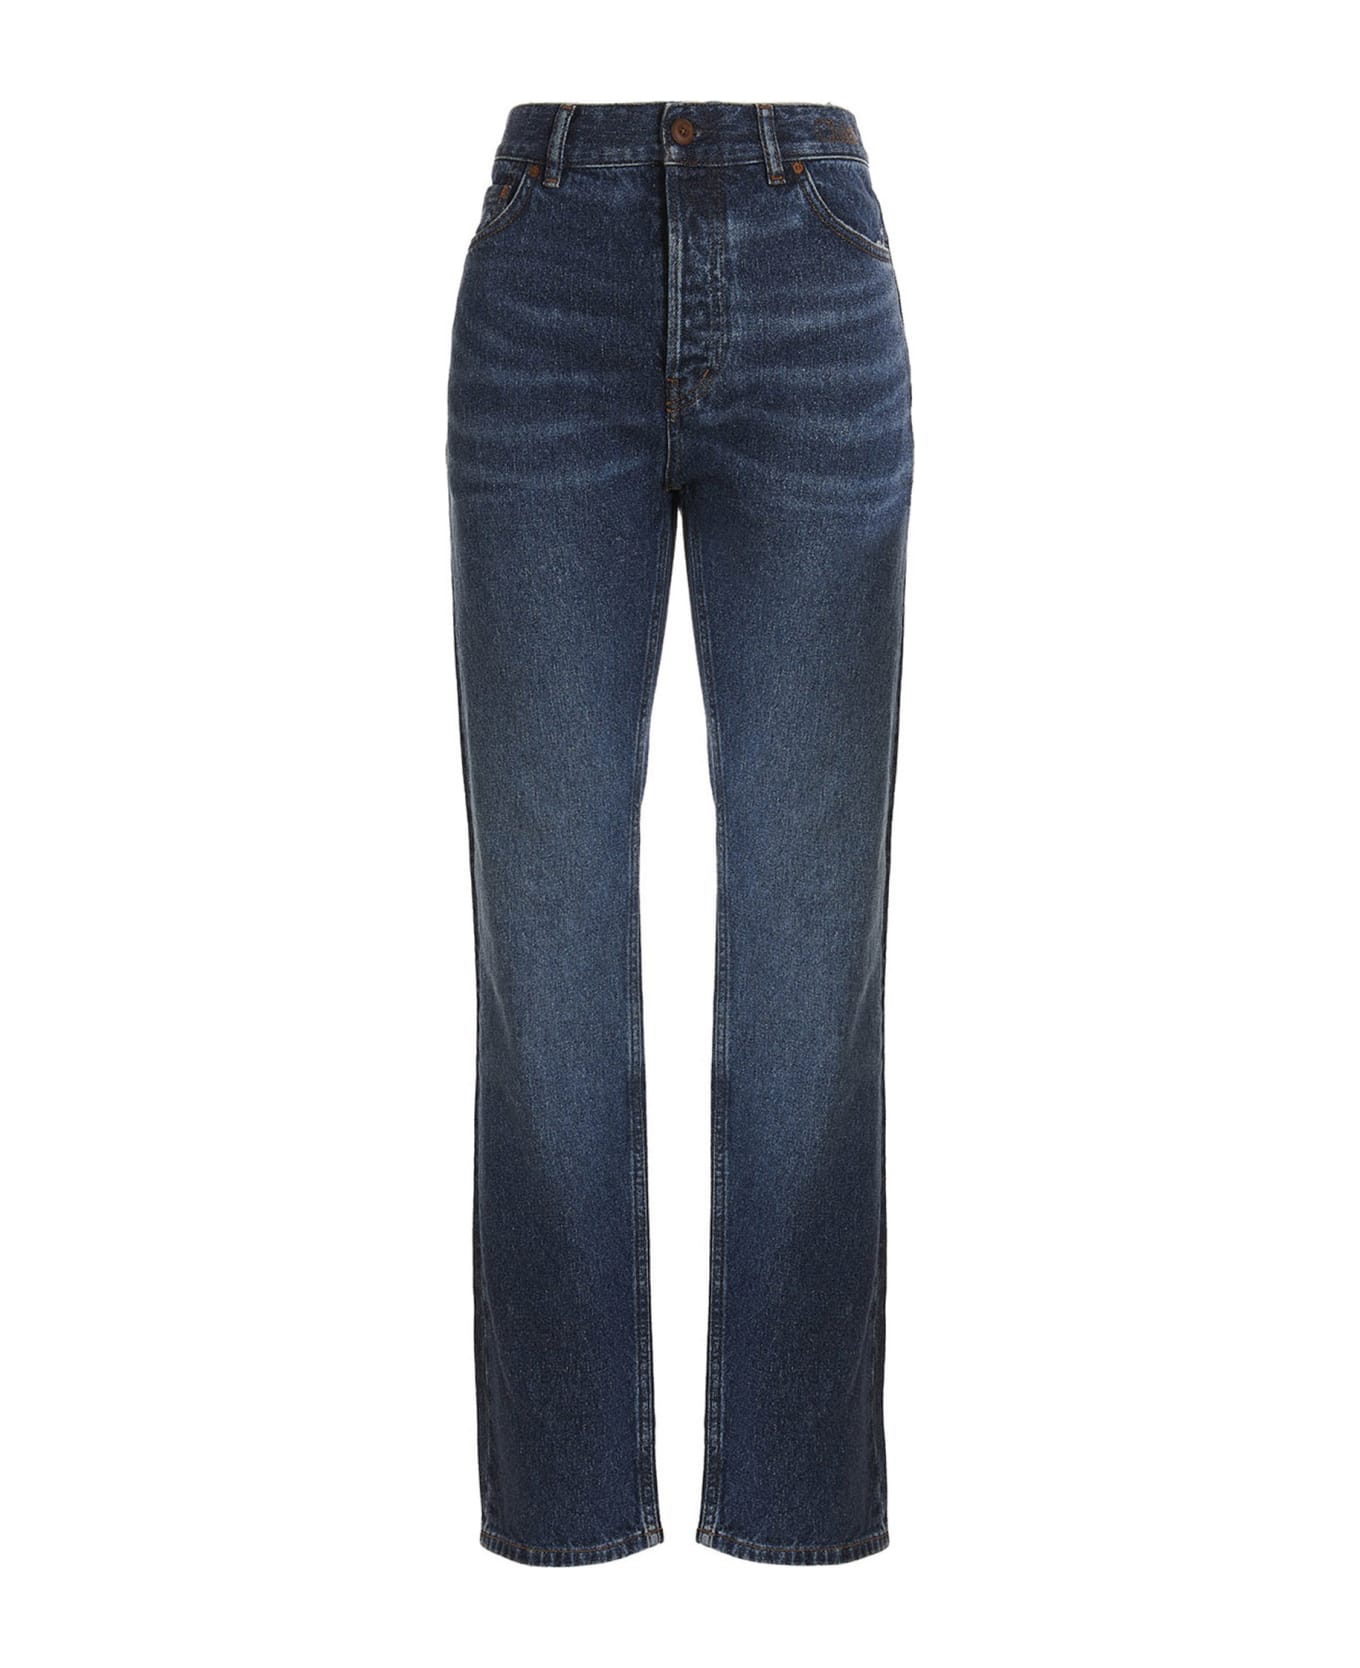 Chloé Embroidered Logo Jeans - Blue